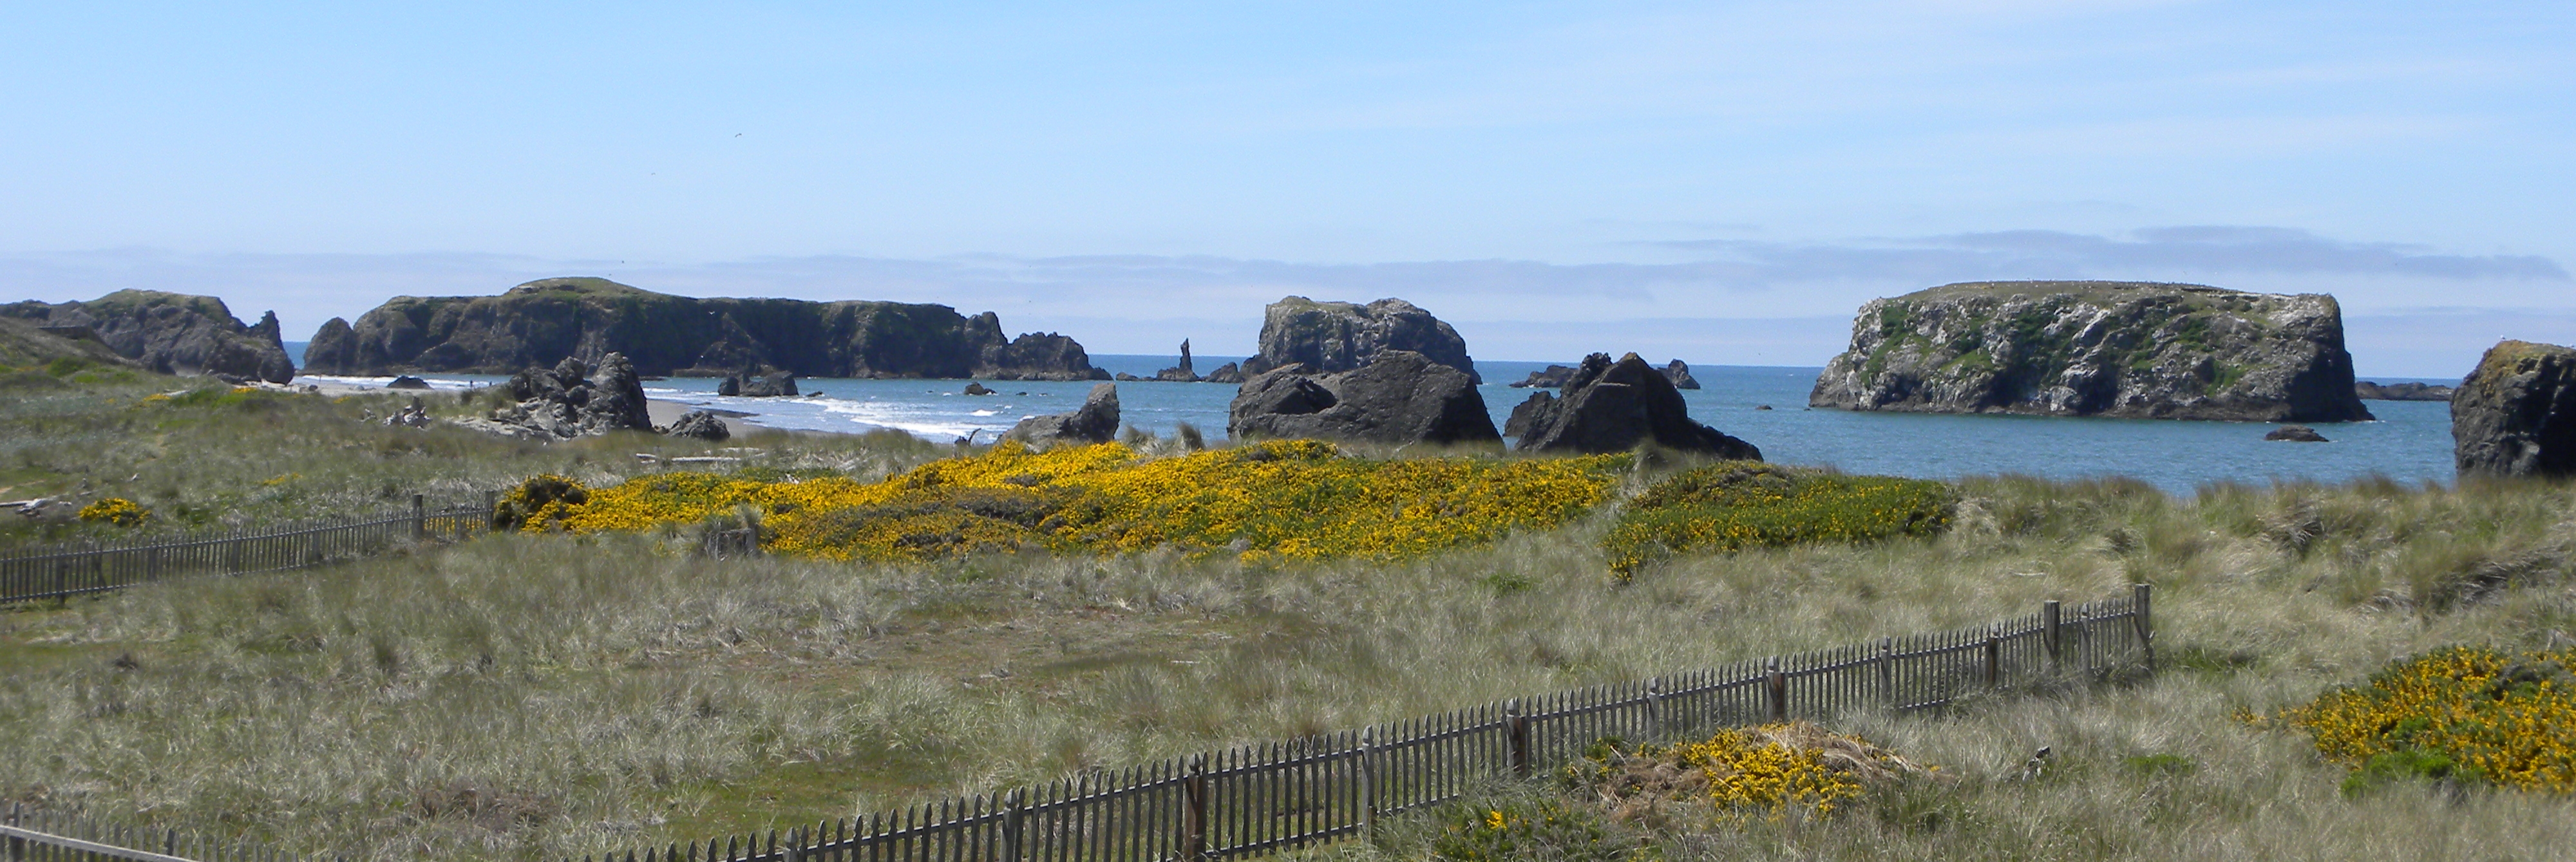 The Dunes House at Bandon, right by the ocean